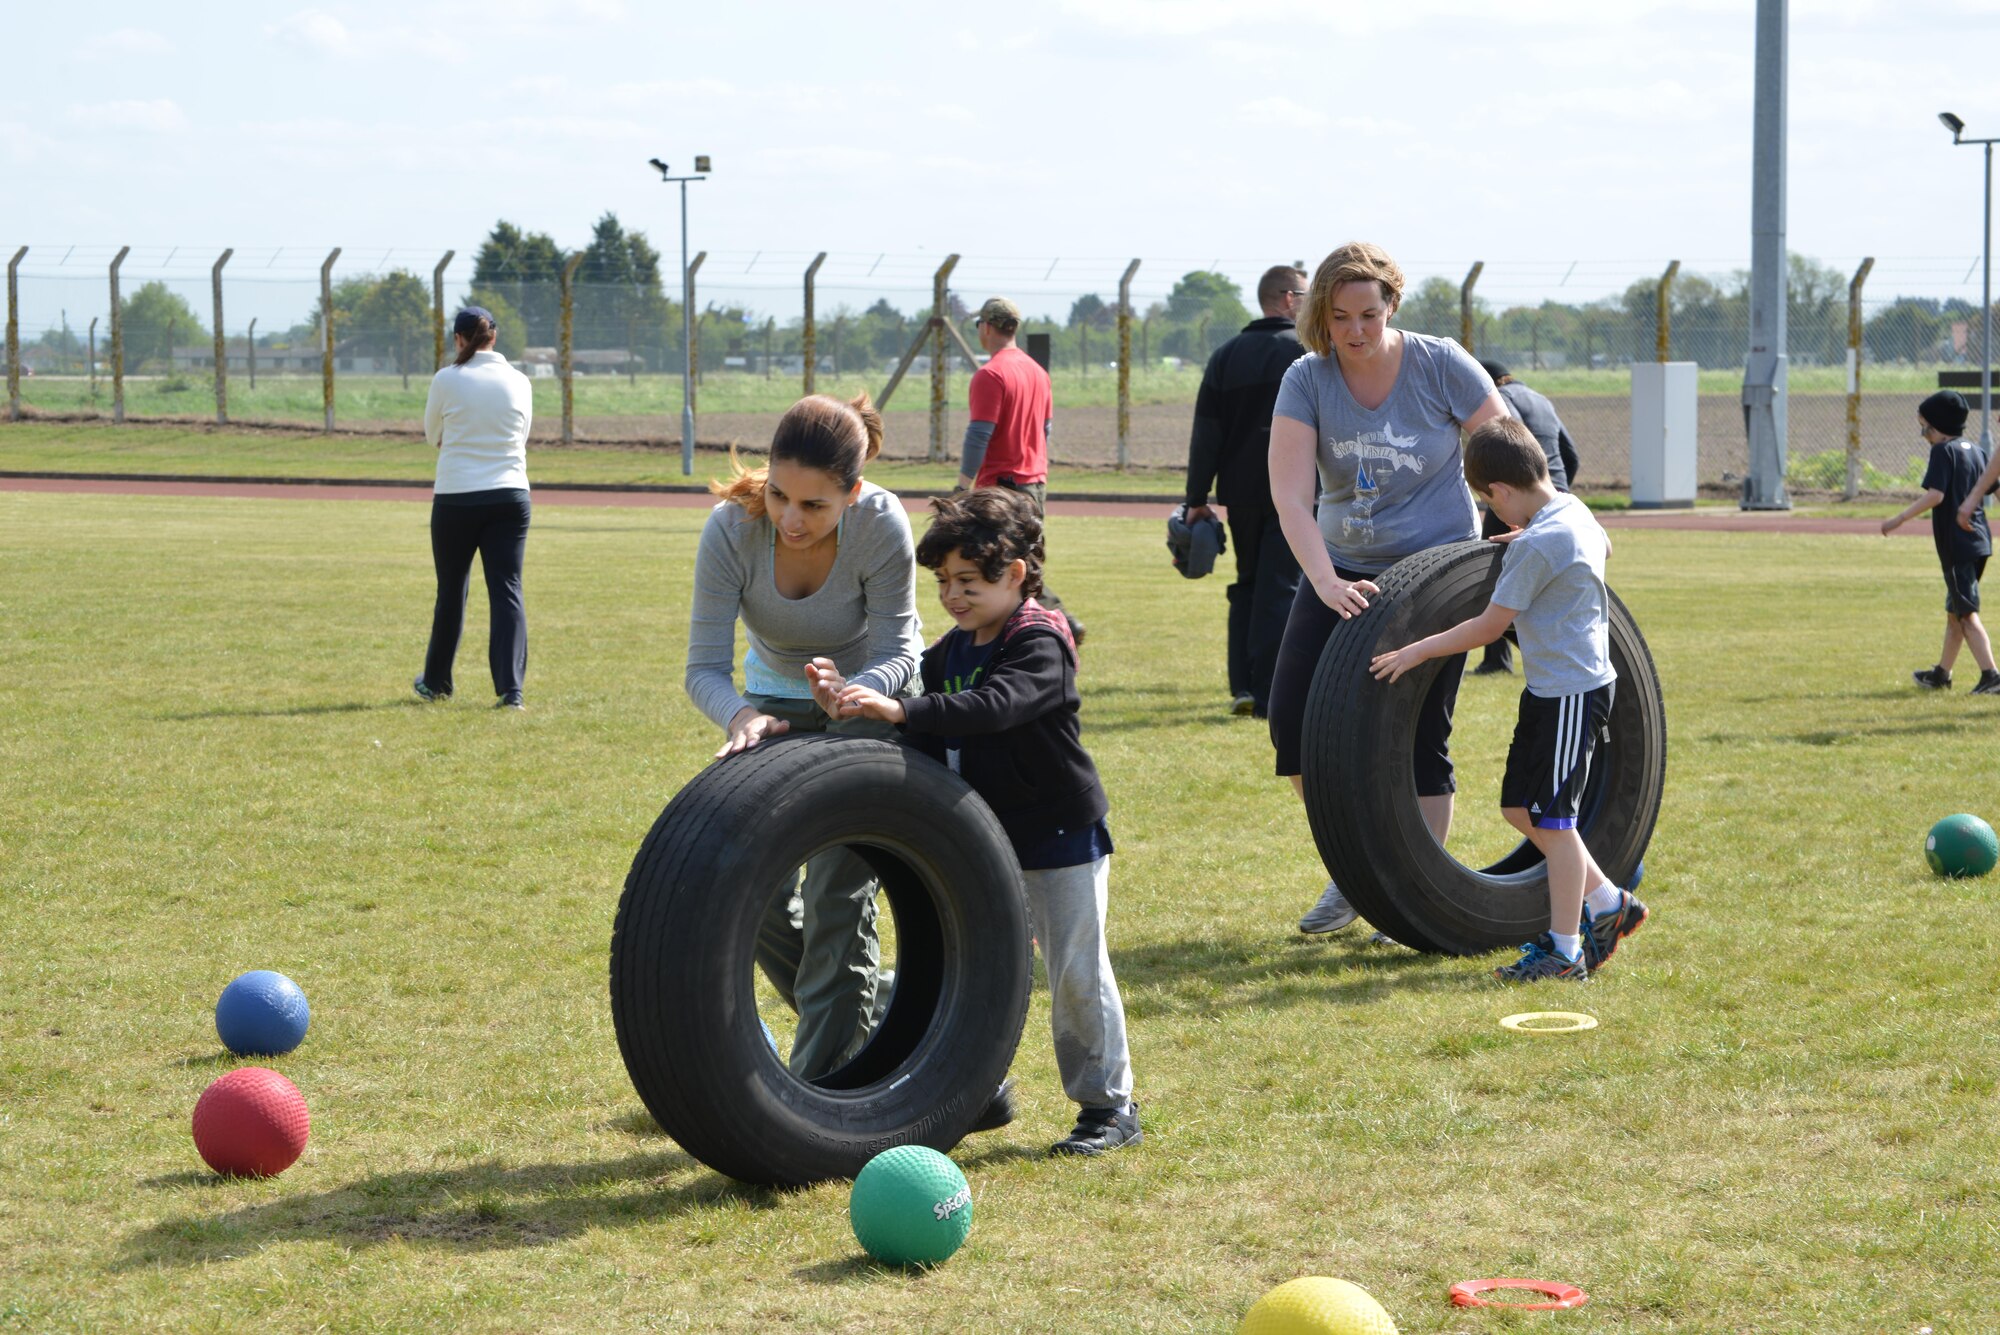 Mothers and their sons roll a tire through an obstacle course during the “Momster Mash” May 16, 2015, at the Heritage Park sports fields on RAF Mildenhall, England. The event was hosted by the 352nd Special Operations Wing Preservation of Force and Families team and was aimed at providing an opportunity for mothers and their sons – traditionally a relationship with difficulties -- to bond. (U.S. Air Force photo by Tech. Sgt. Stacia Zachary)